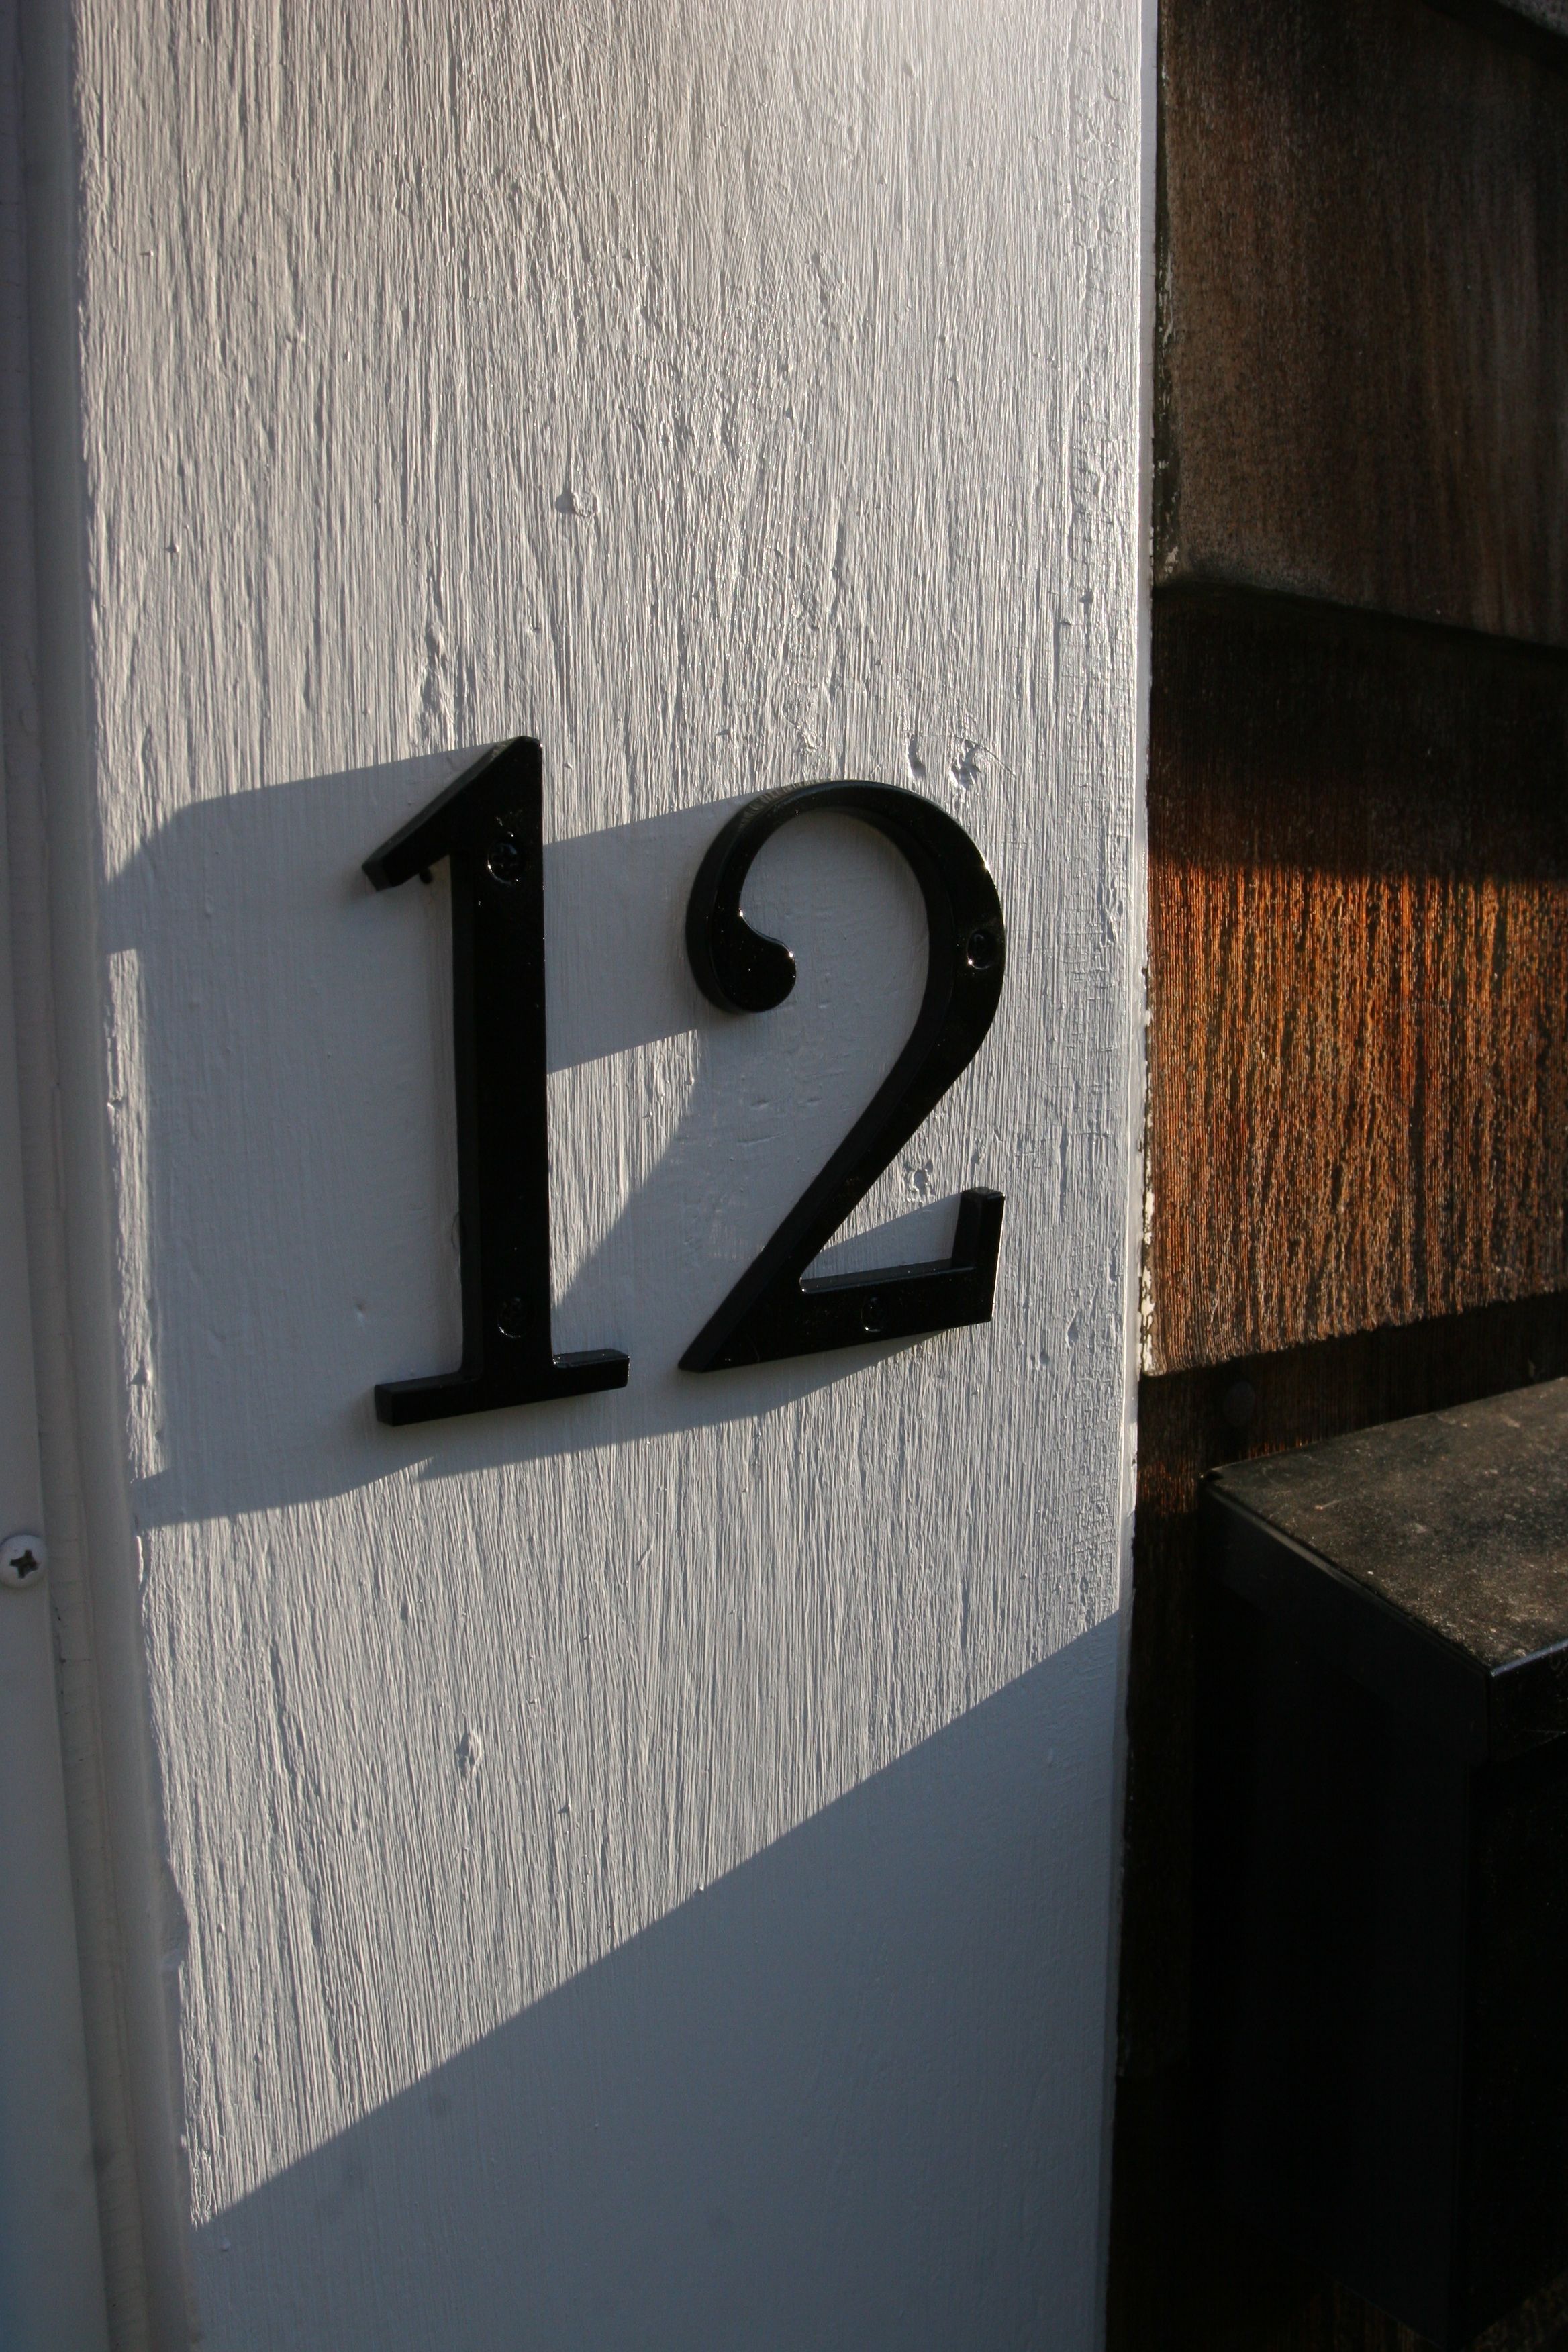 We even re-sprayed our house numbers. Shiny, crisp black! Love!